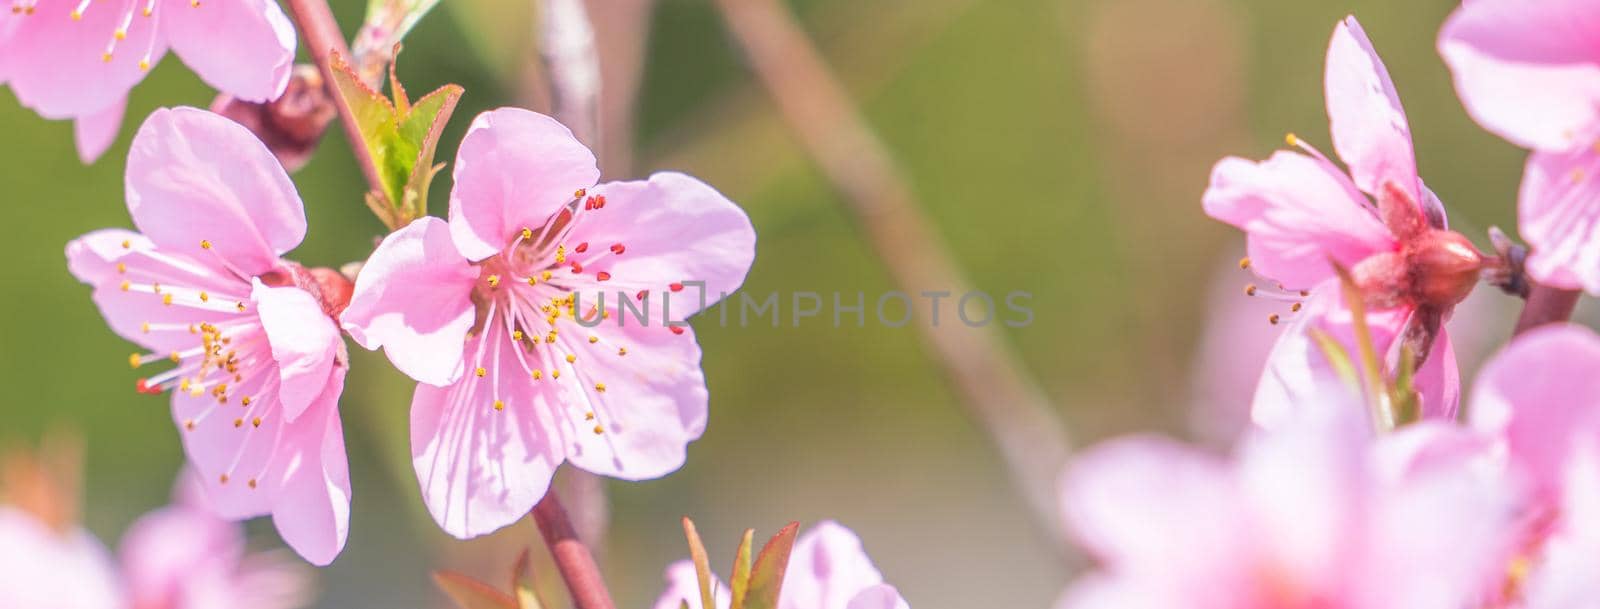 Beautiful and elegant pale light pink peach blossom flower on the tree branch at a public park garden in Spring, Japan. Blurred background.